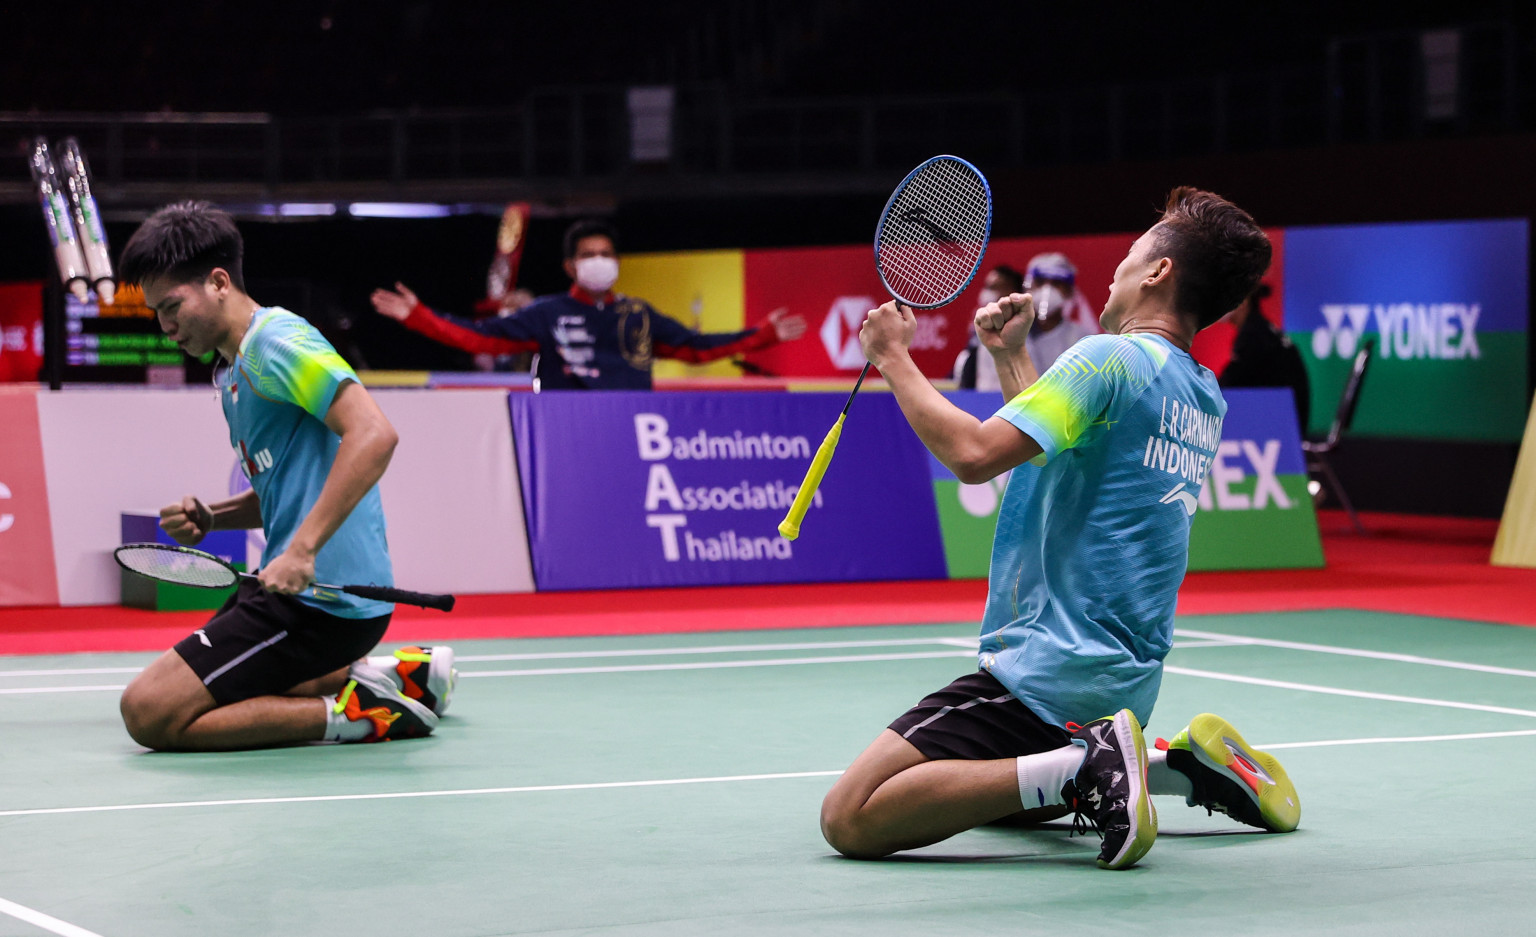 World junior champions knock out fifth seeds in Thailand Open men's doubles